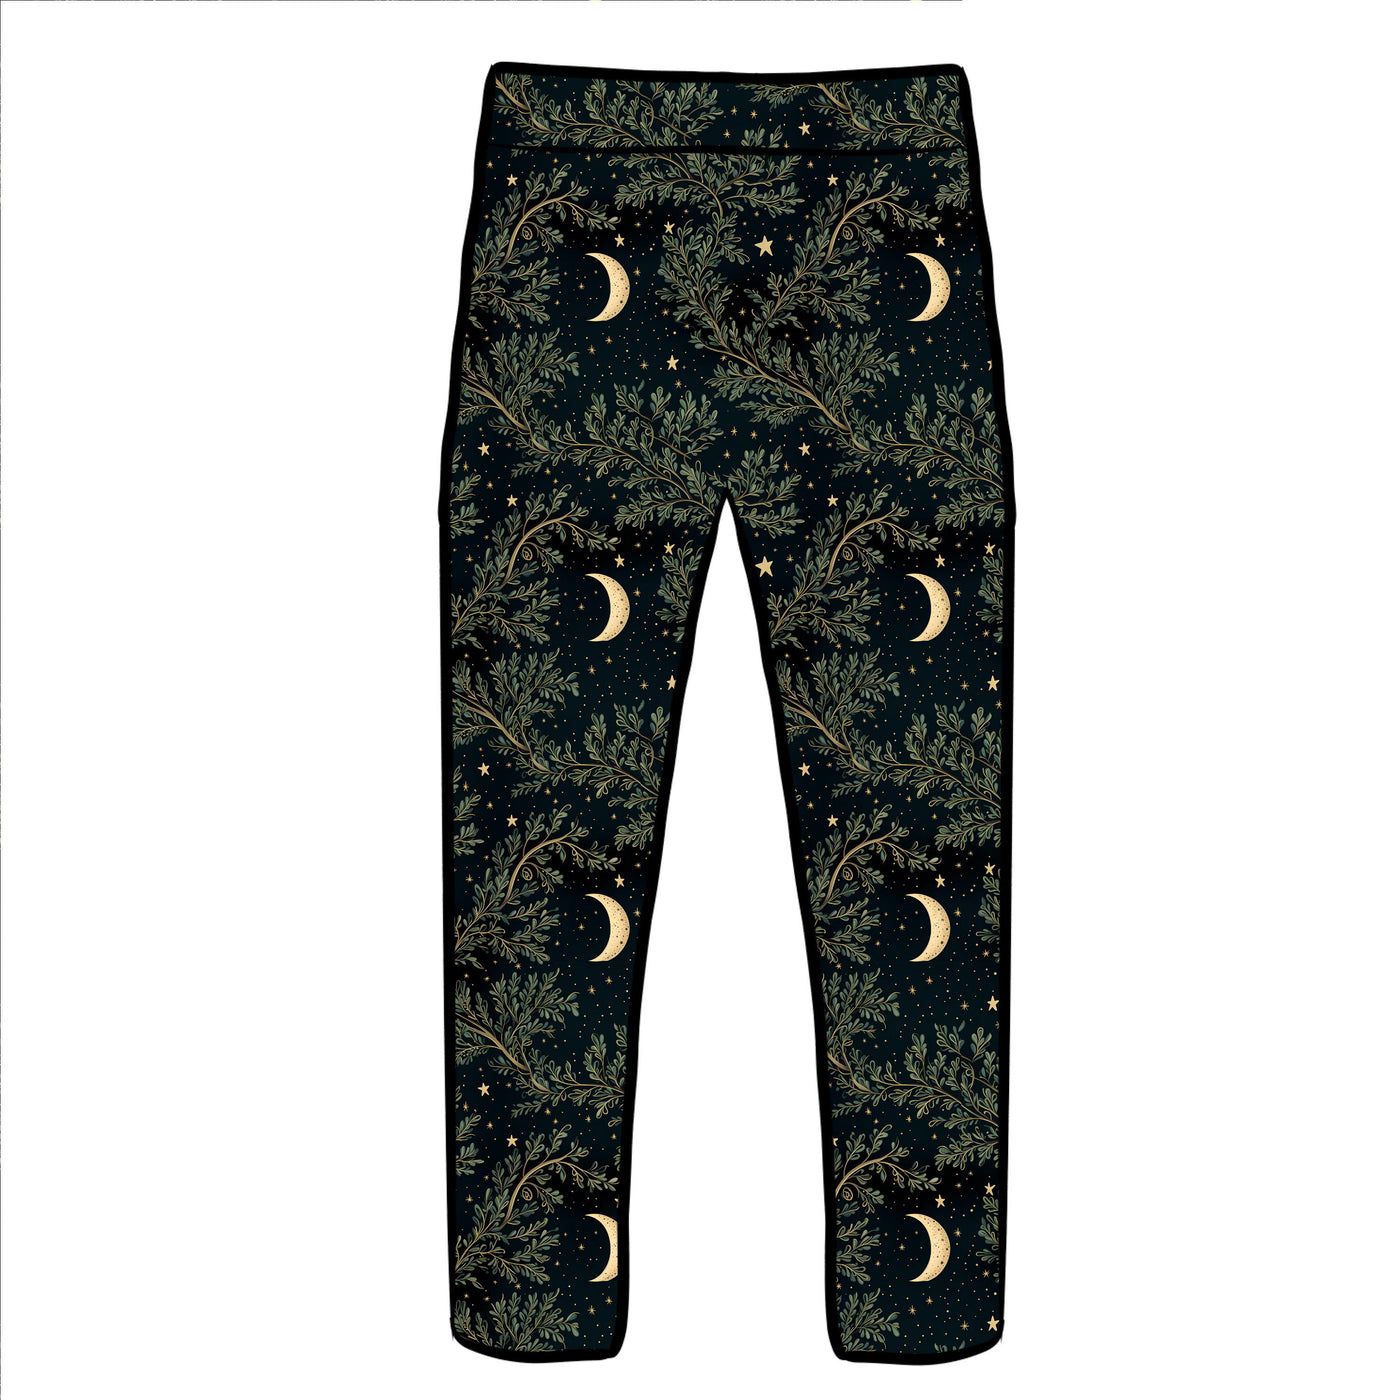 ***PRE-ORDER FOR DELIVERY 2ND WEEK MARCH*** Pagan Night Super Soft Leggings